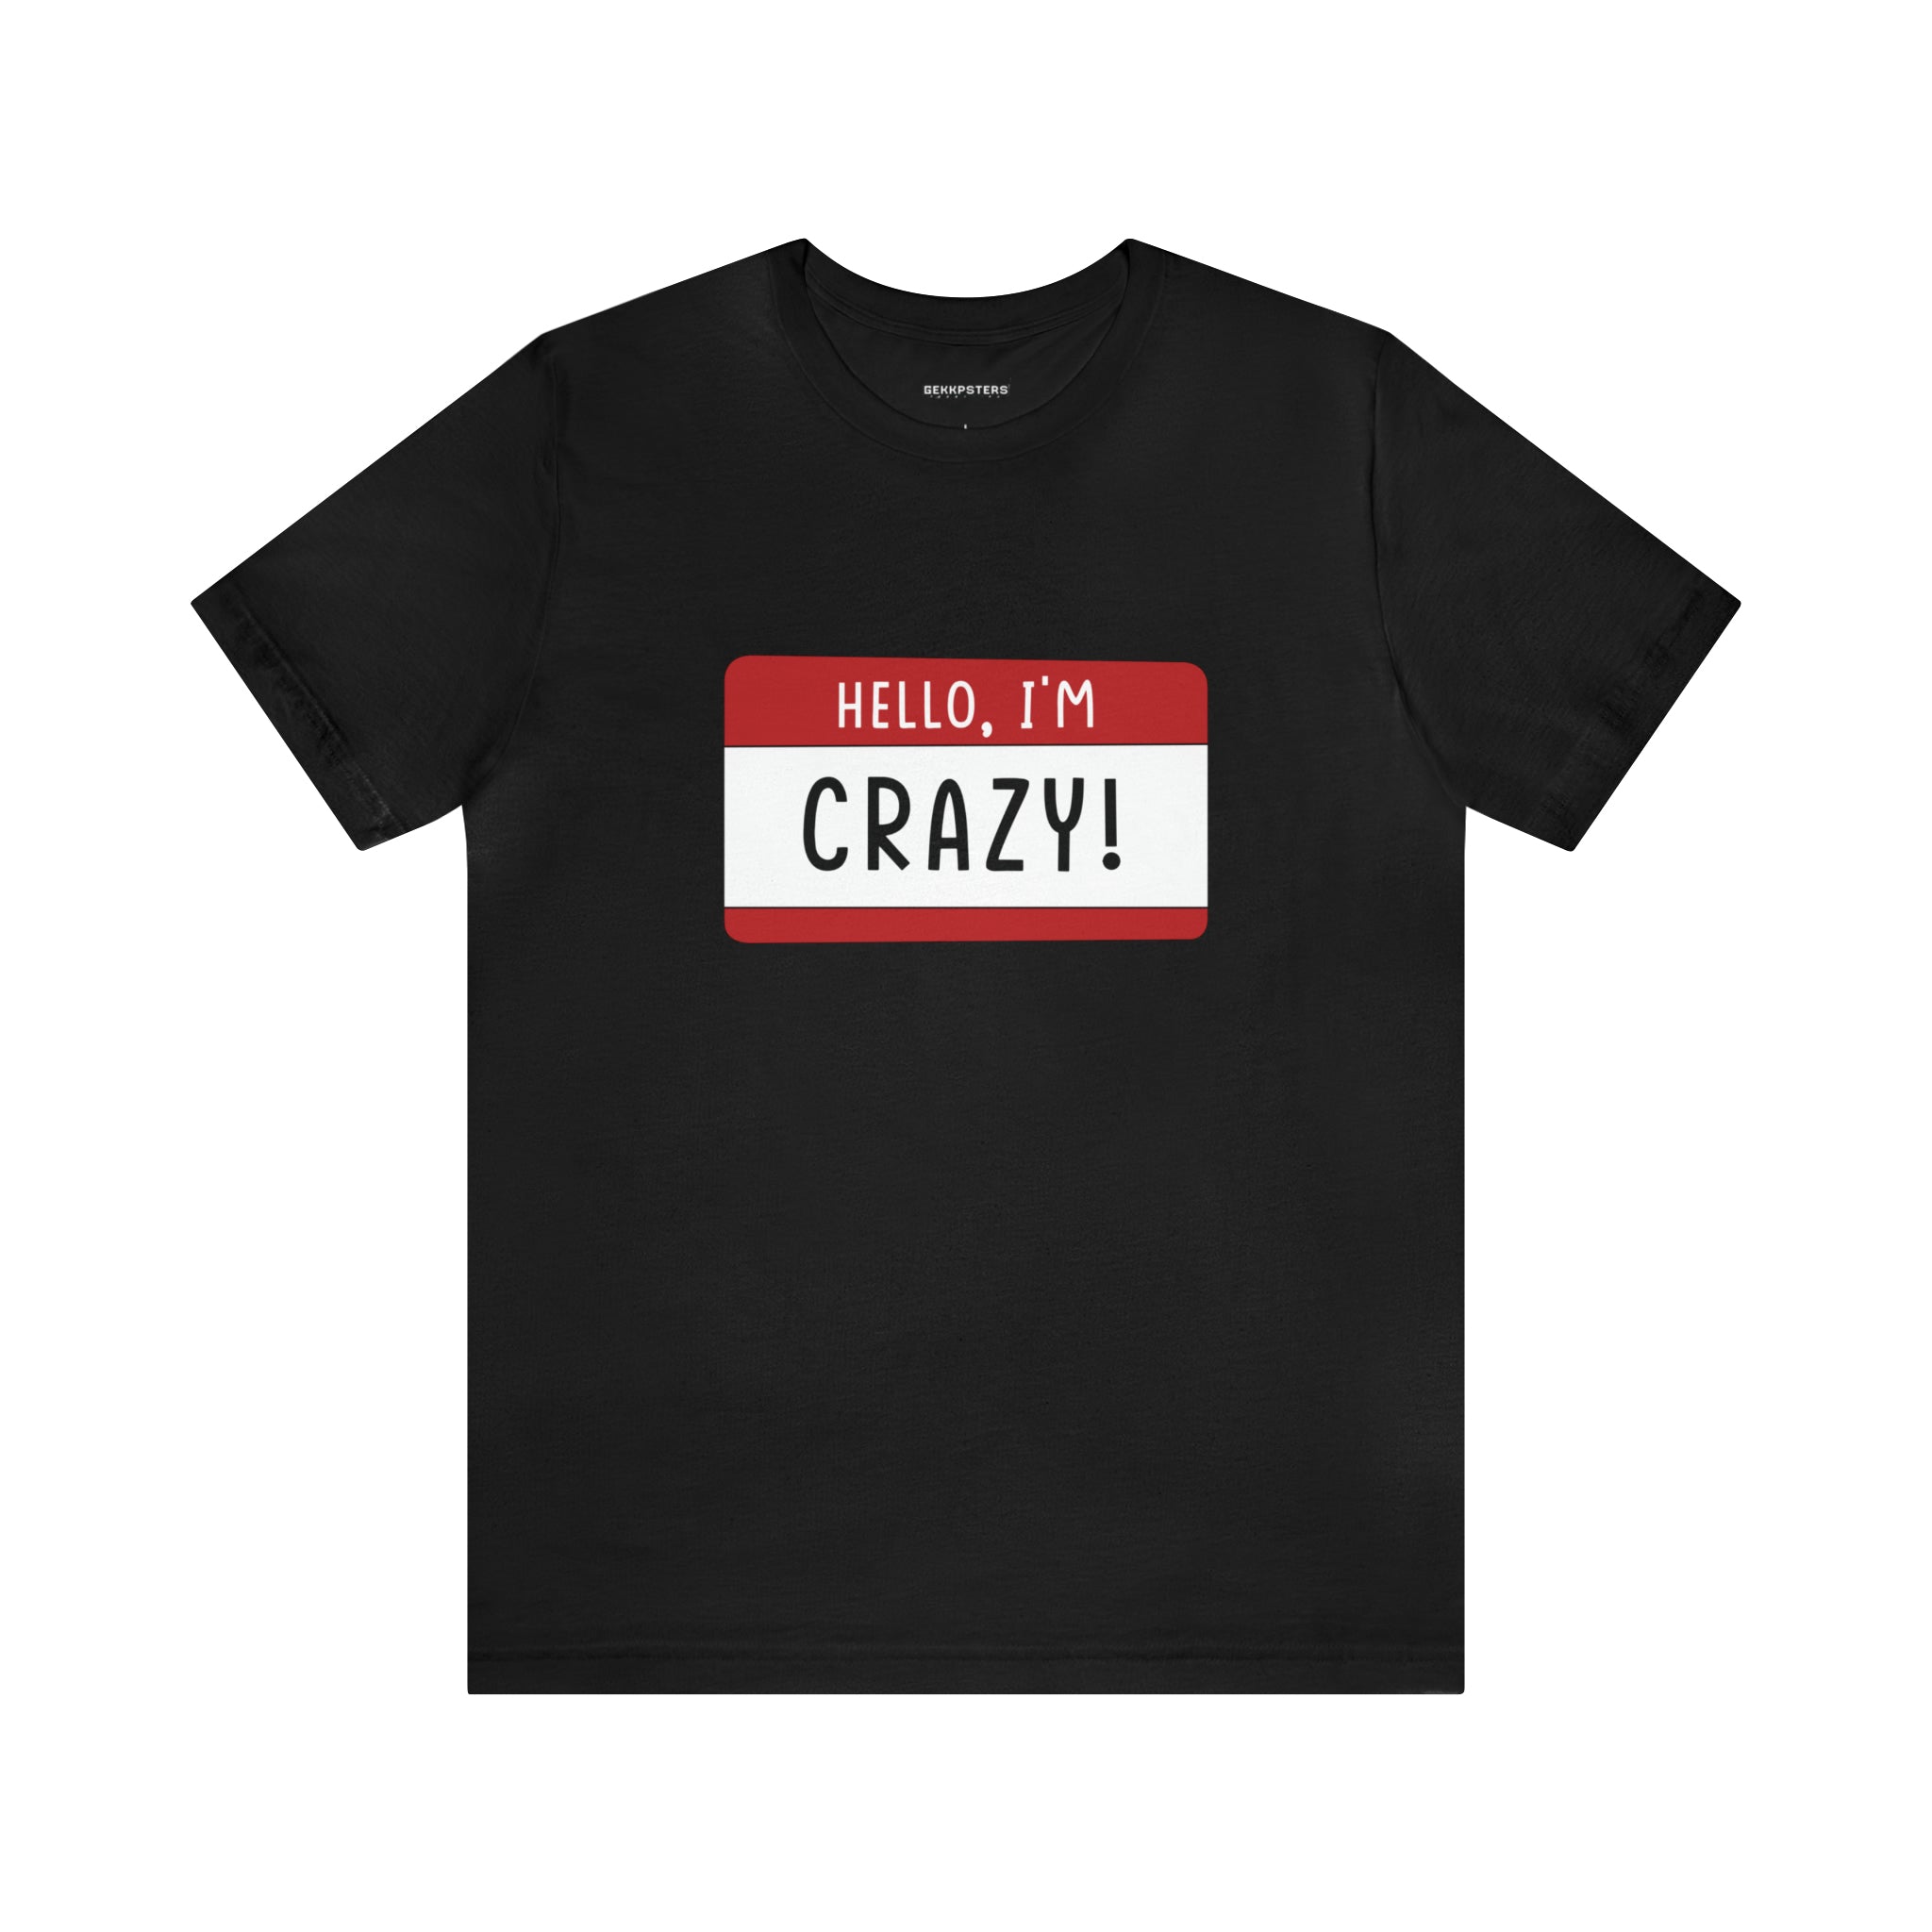 Hello, I'm CRAZY T-Shirt with a red and white name tag design on the chest that reads "hello, i'm crazy!" This quirky t-shirt makes a statement with its unique design.